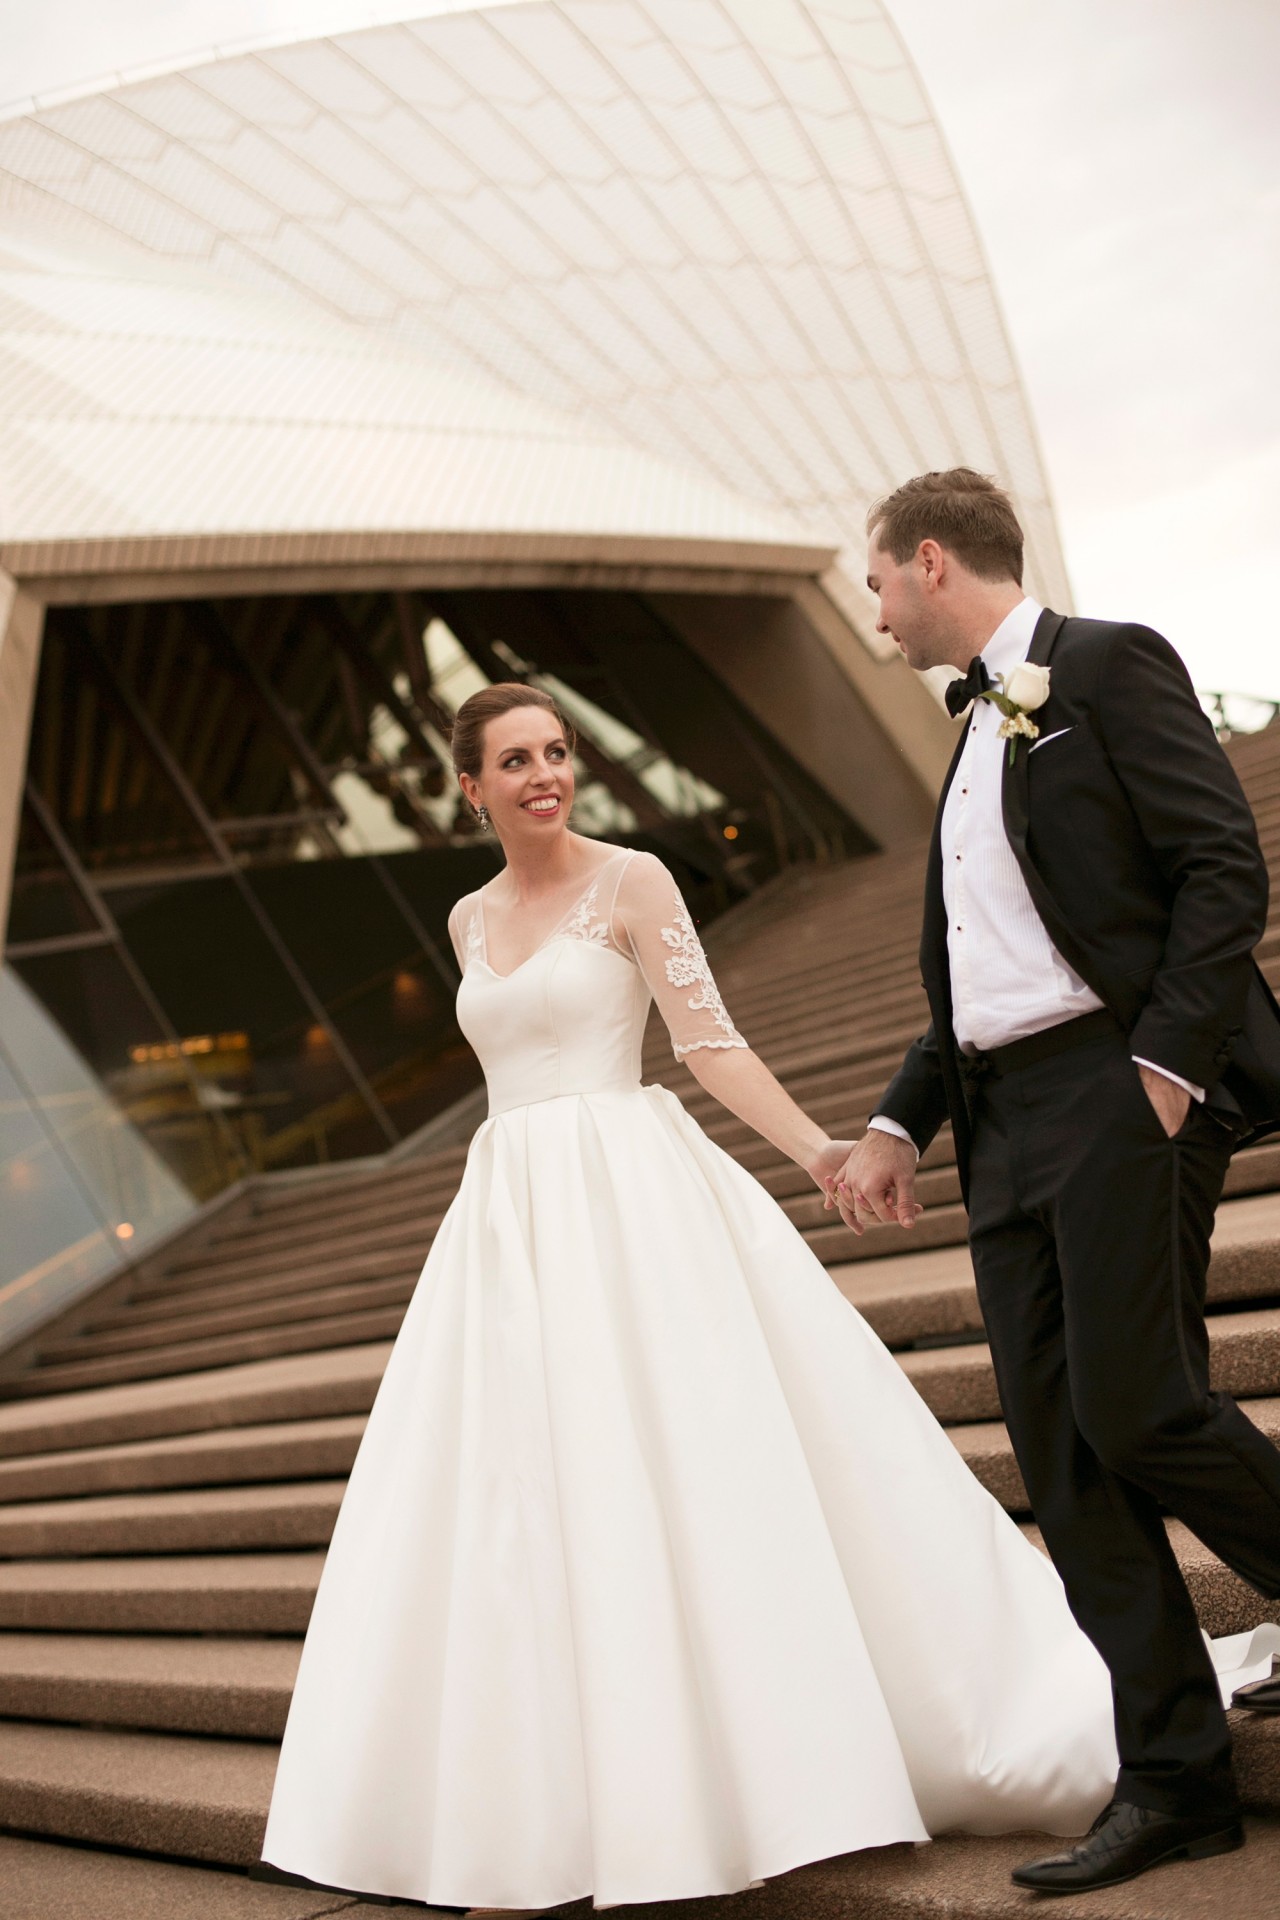 Patricia and Alex's guests felt like they were dancing on the city. Image: 